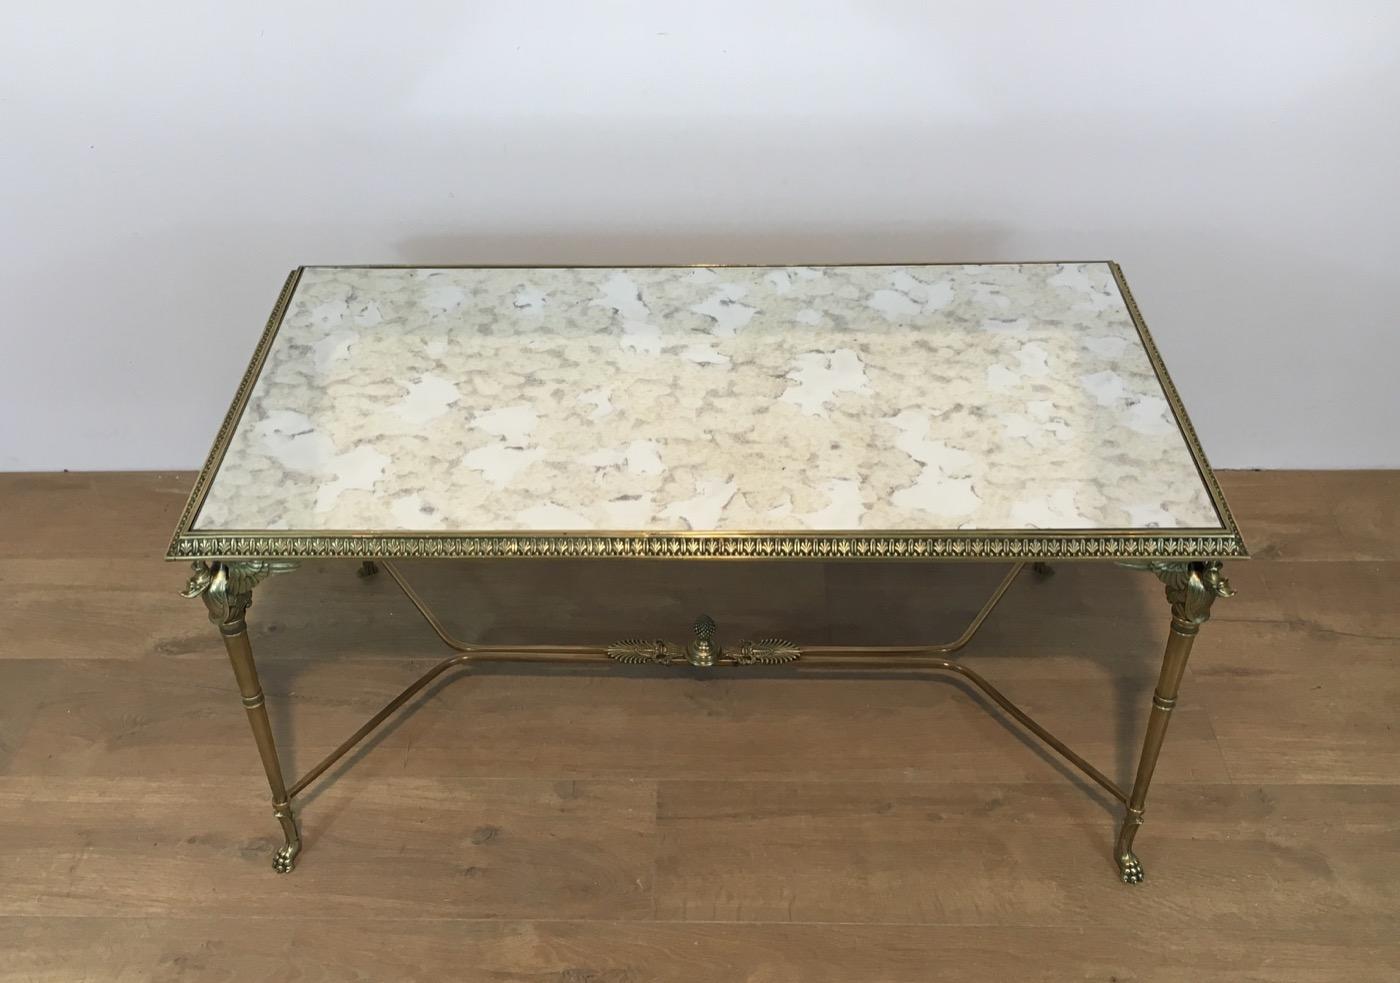 This rare coffee table is made of bronze and brass with a faux-antiques mirror top. It has swan figures on each corner and claw feet. This is a very interesting coffee table, in the style of Maison Jansen. This is French, circa 1940.